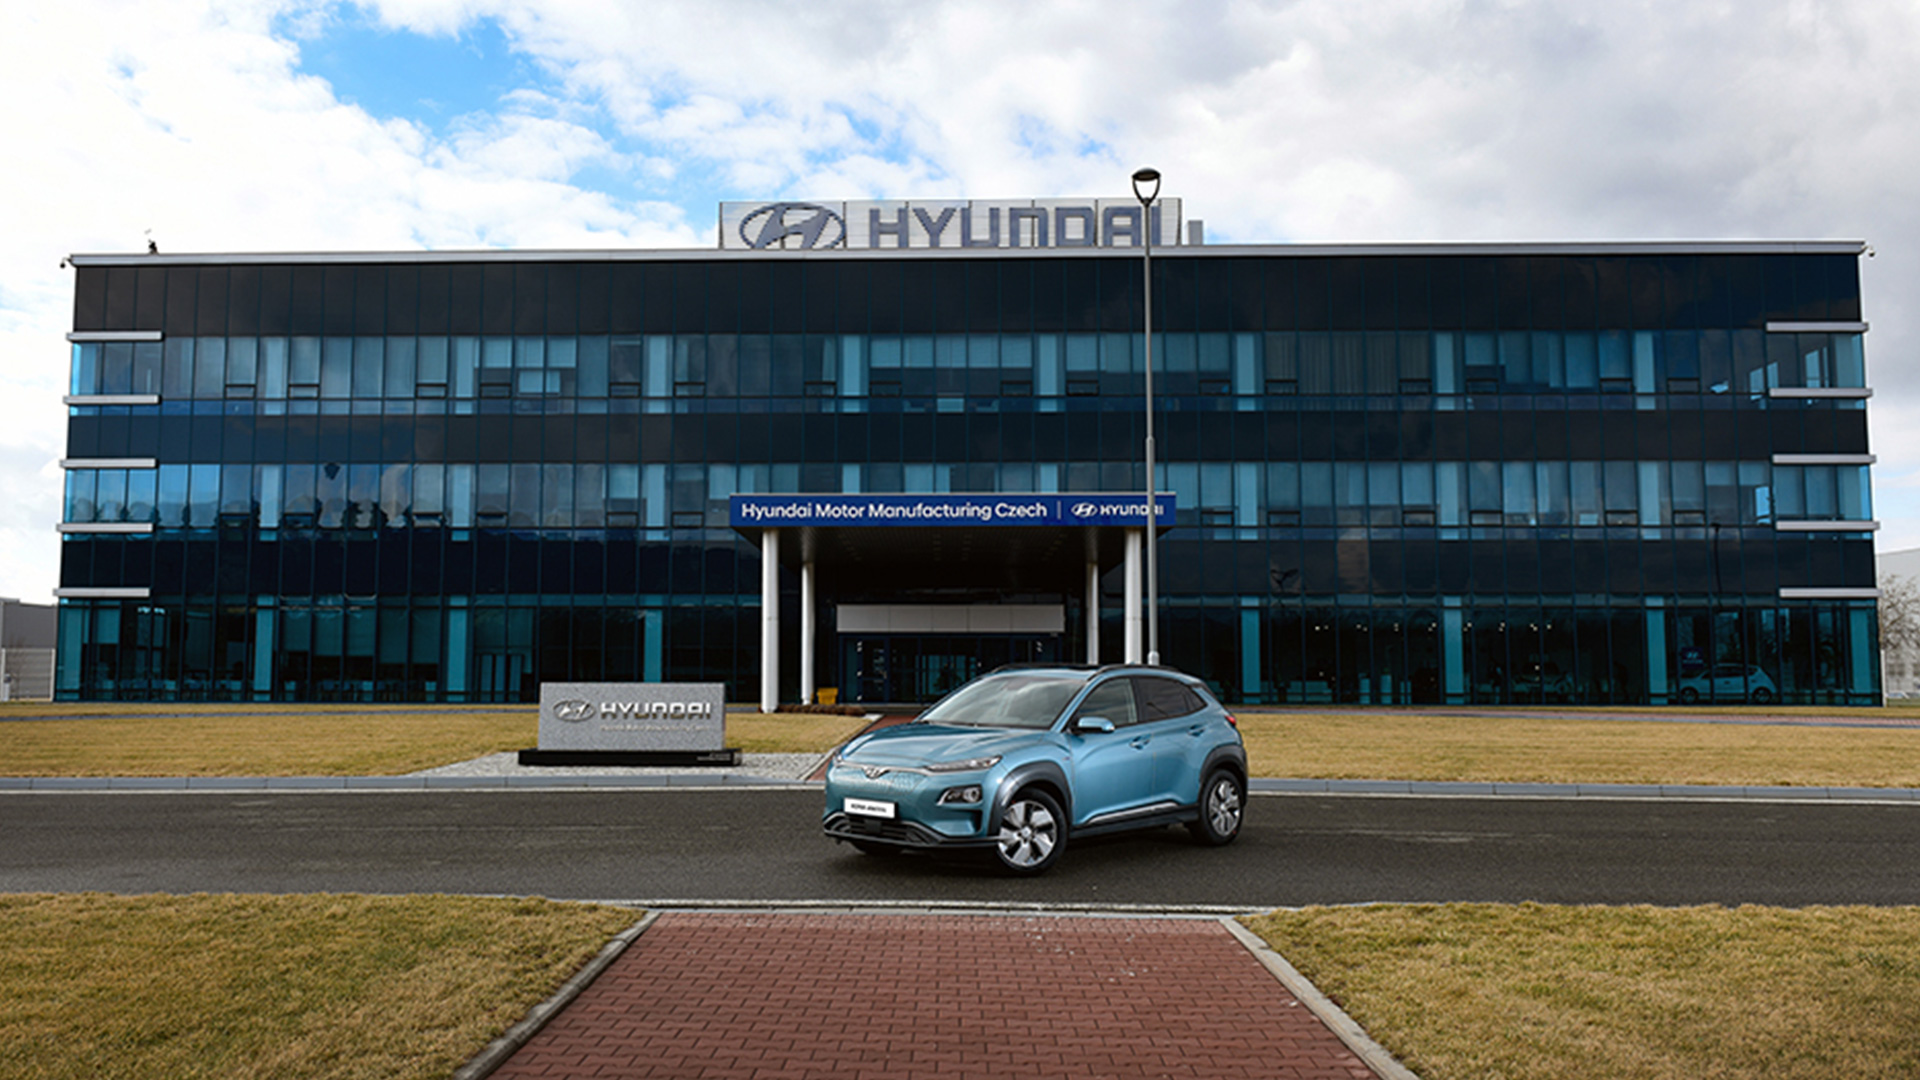 Hyundai finalizes preparation before start of production of Kona Electric in the Czech Republic